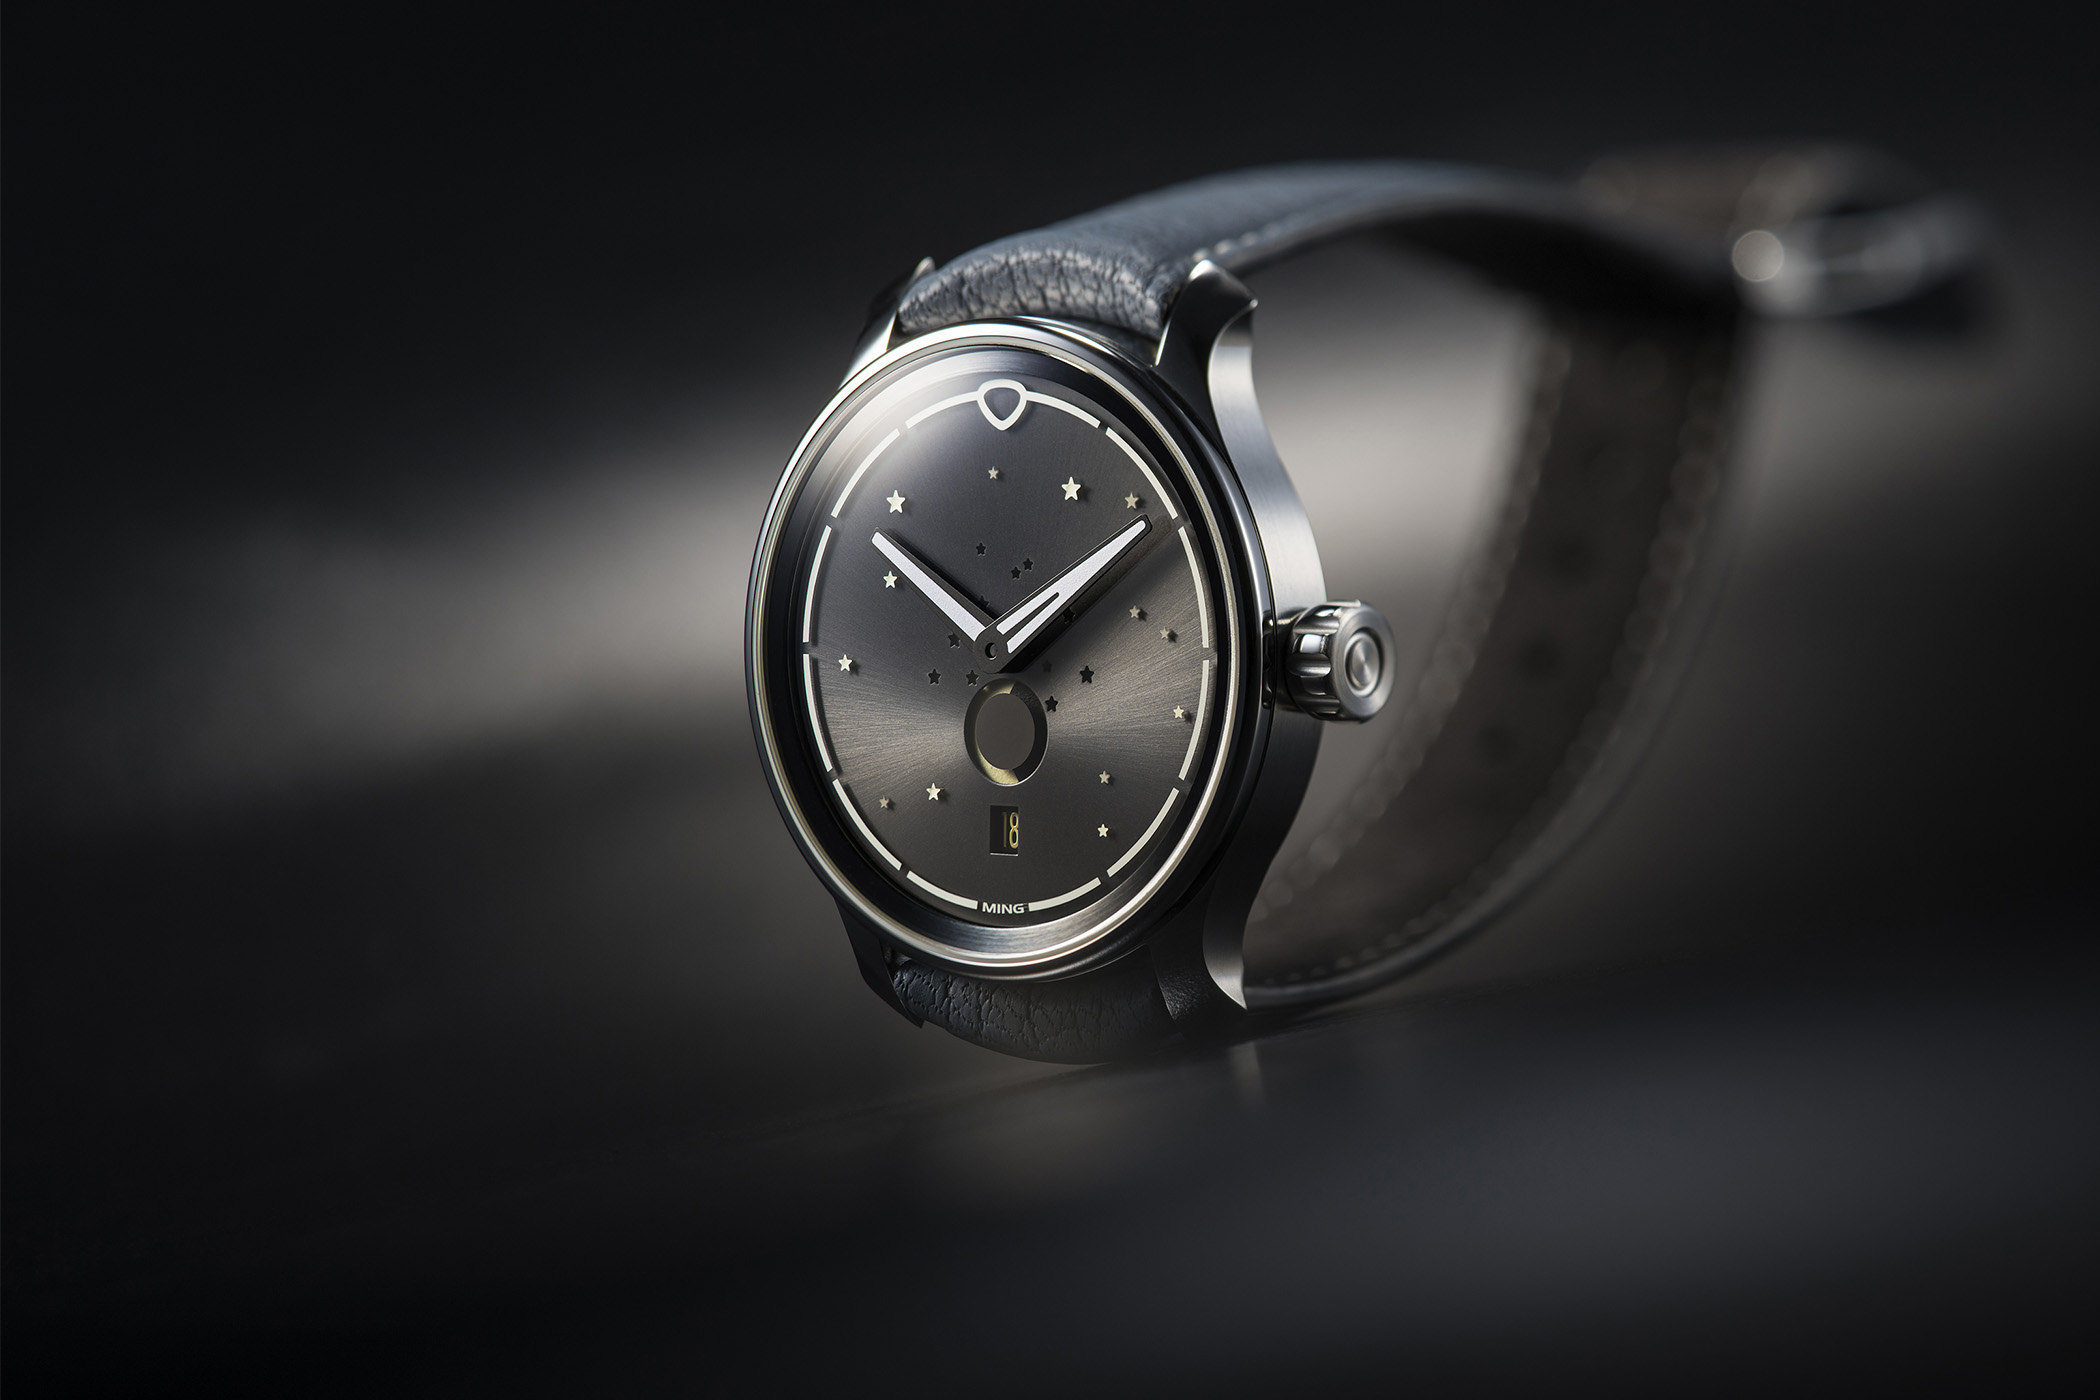 Introducing The New MING 37.05 Series 2 Moonphase